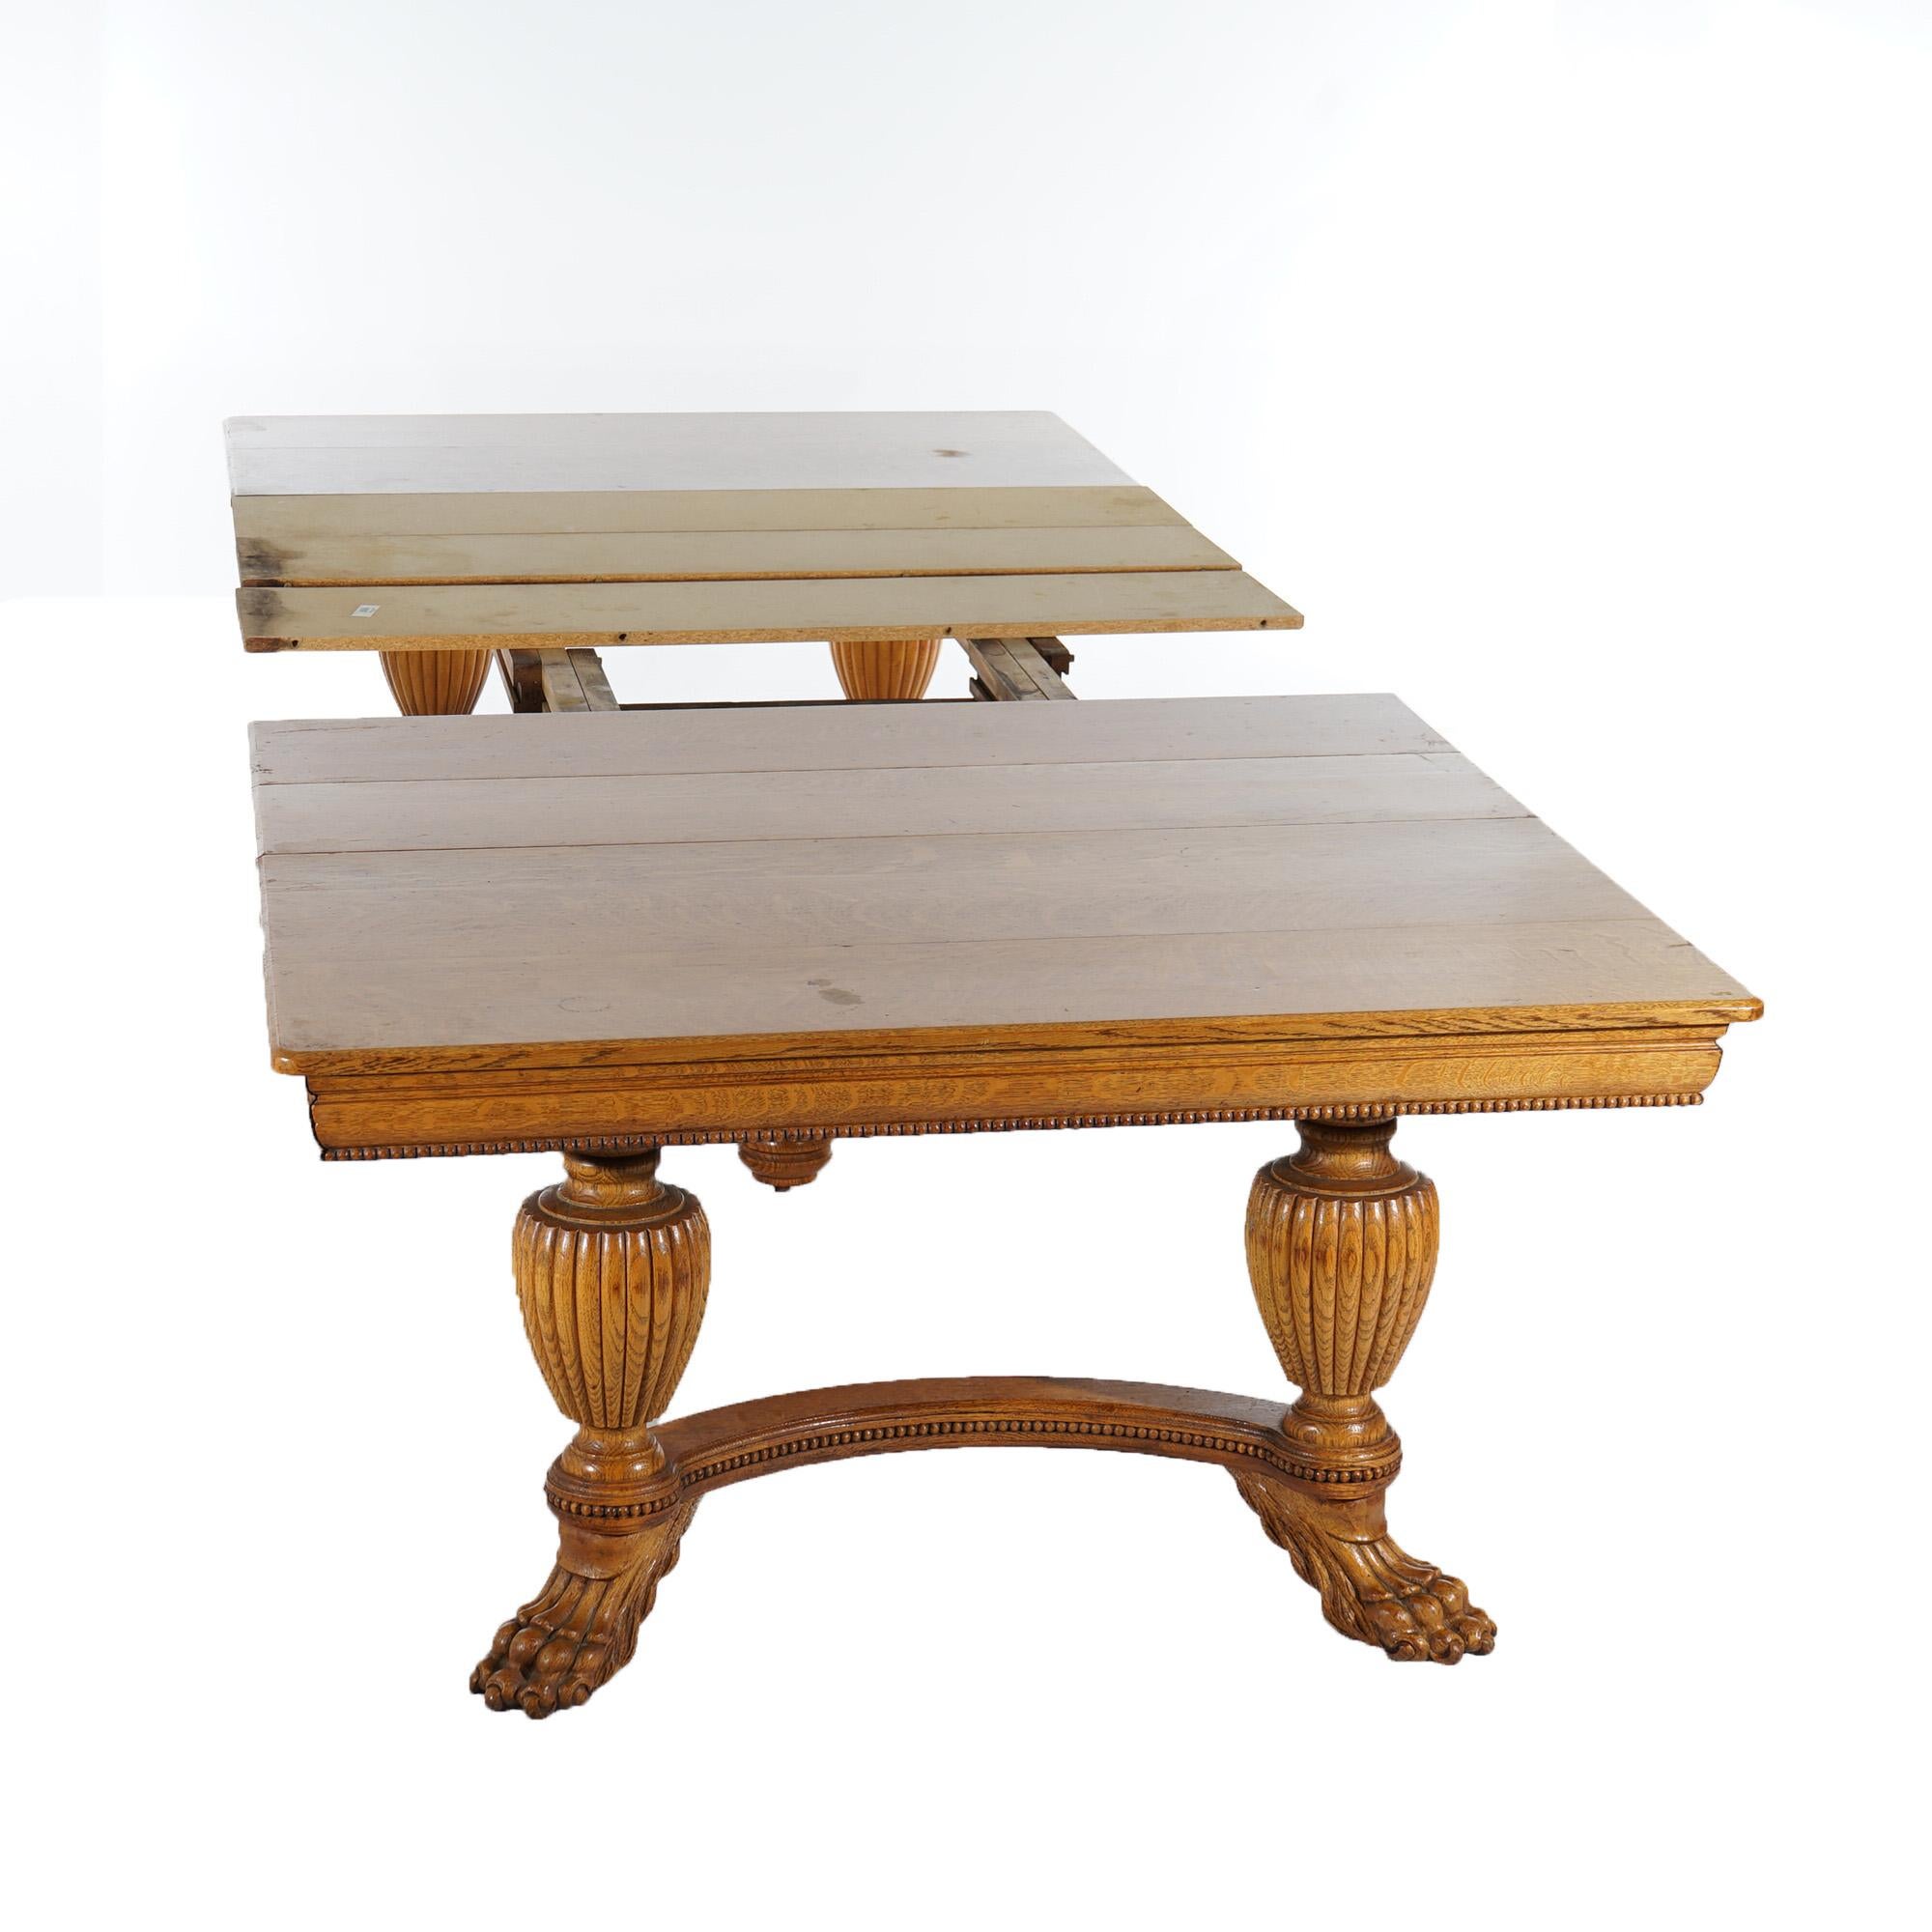 Carved Antique Square Quarter Sawn Oak Dining Table with Five Leaves & Claw Feet c1900